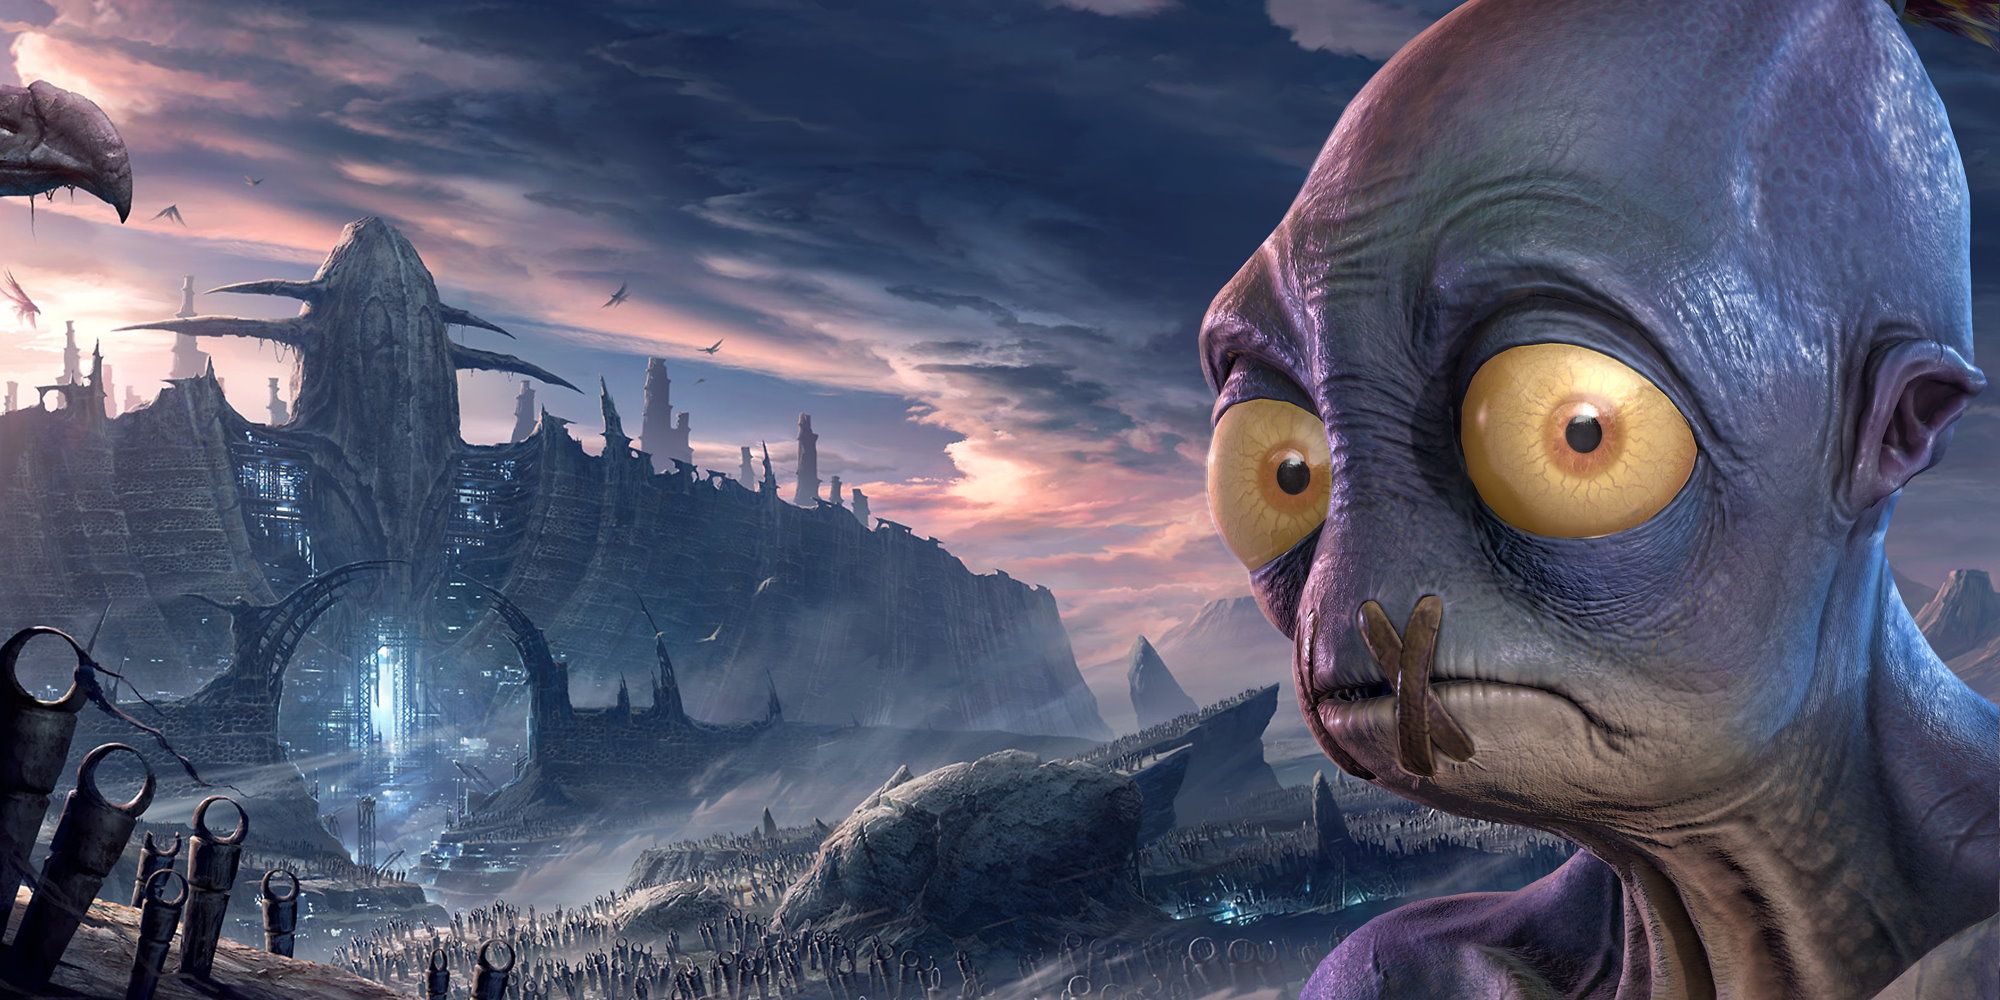 Screenshot of Abe from Oddworld Soulstorm in the foreground, with a desolate dystopian city in the background.